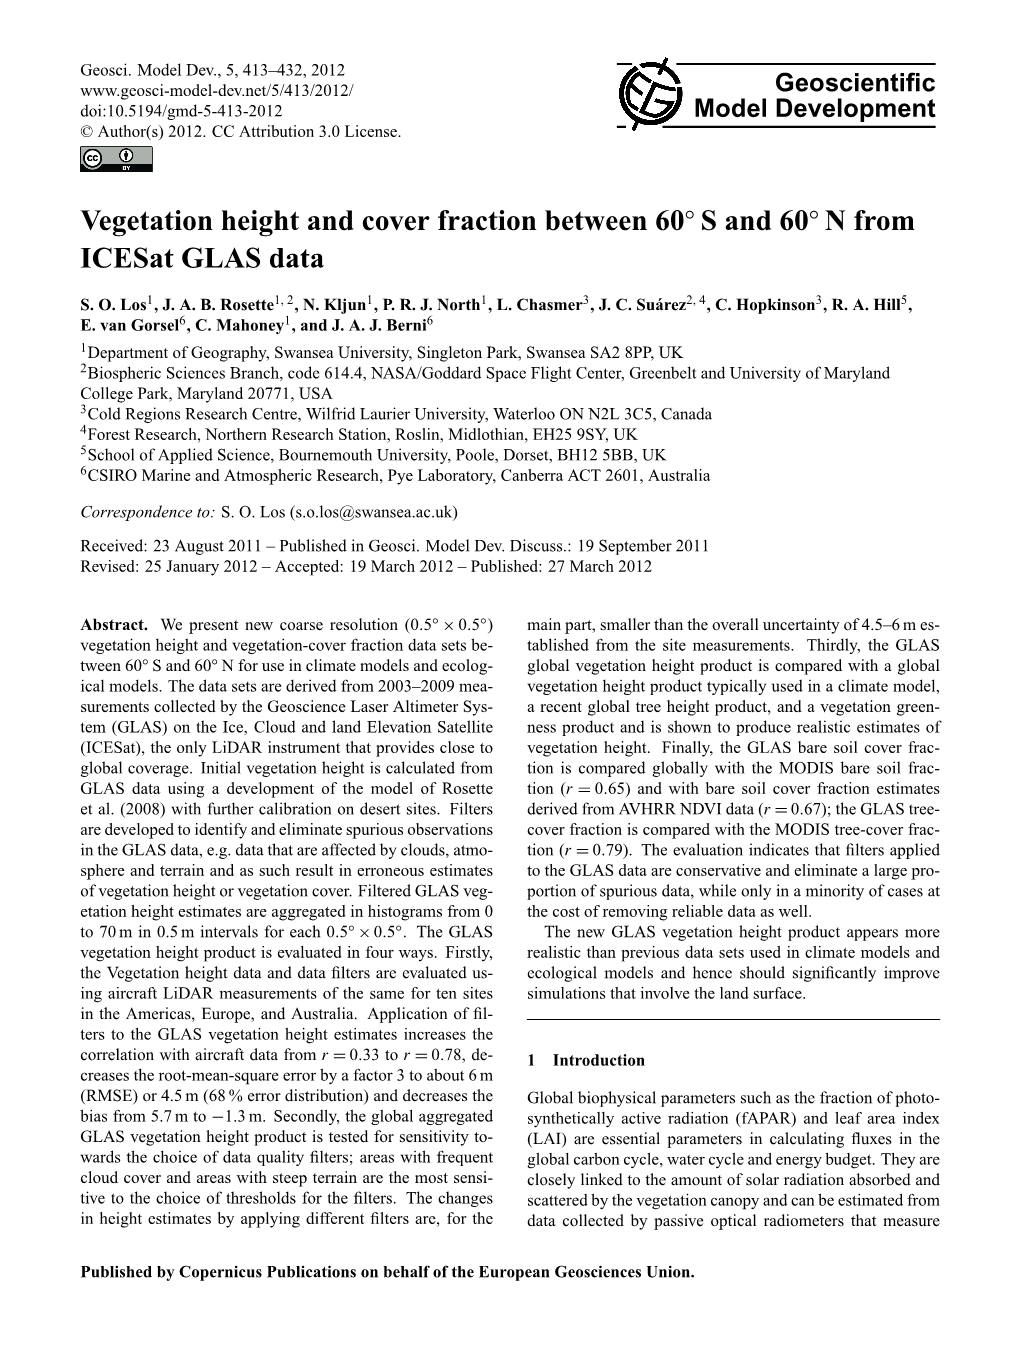 Vegetation Height and Cover Fraction Between 60 S and 60 N From